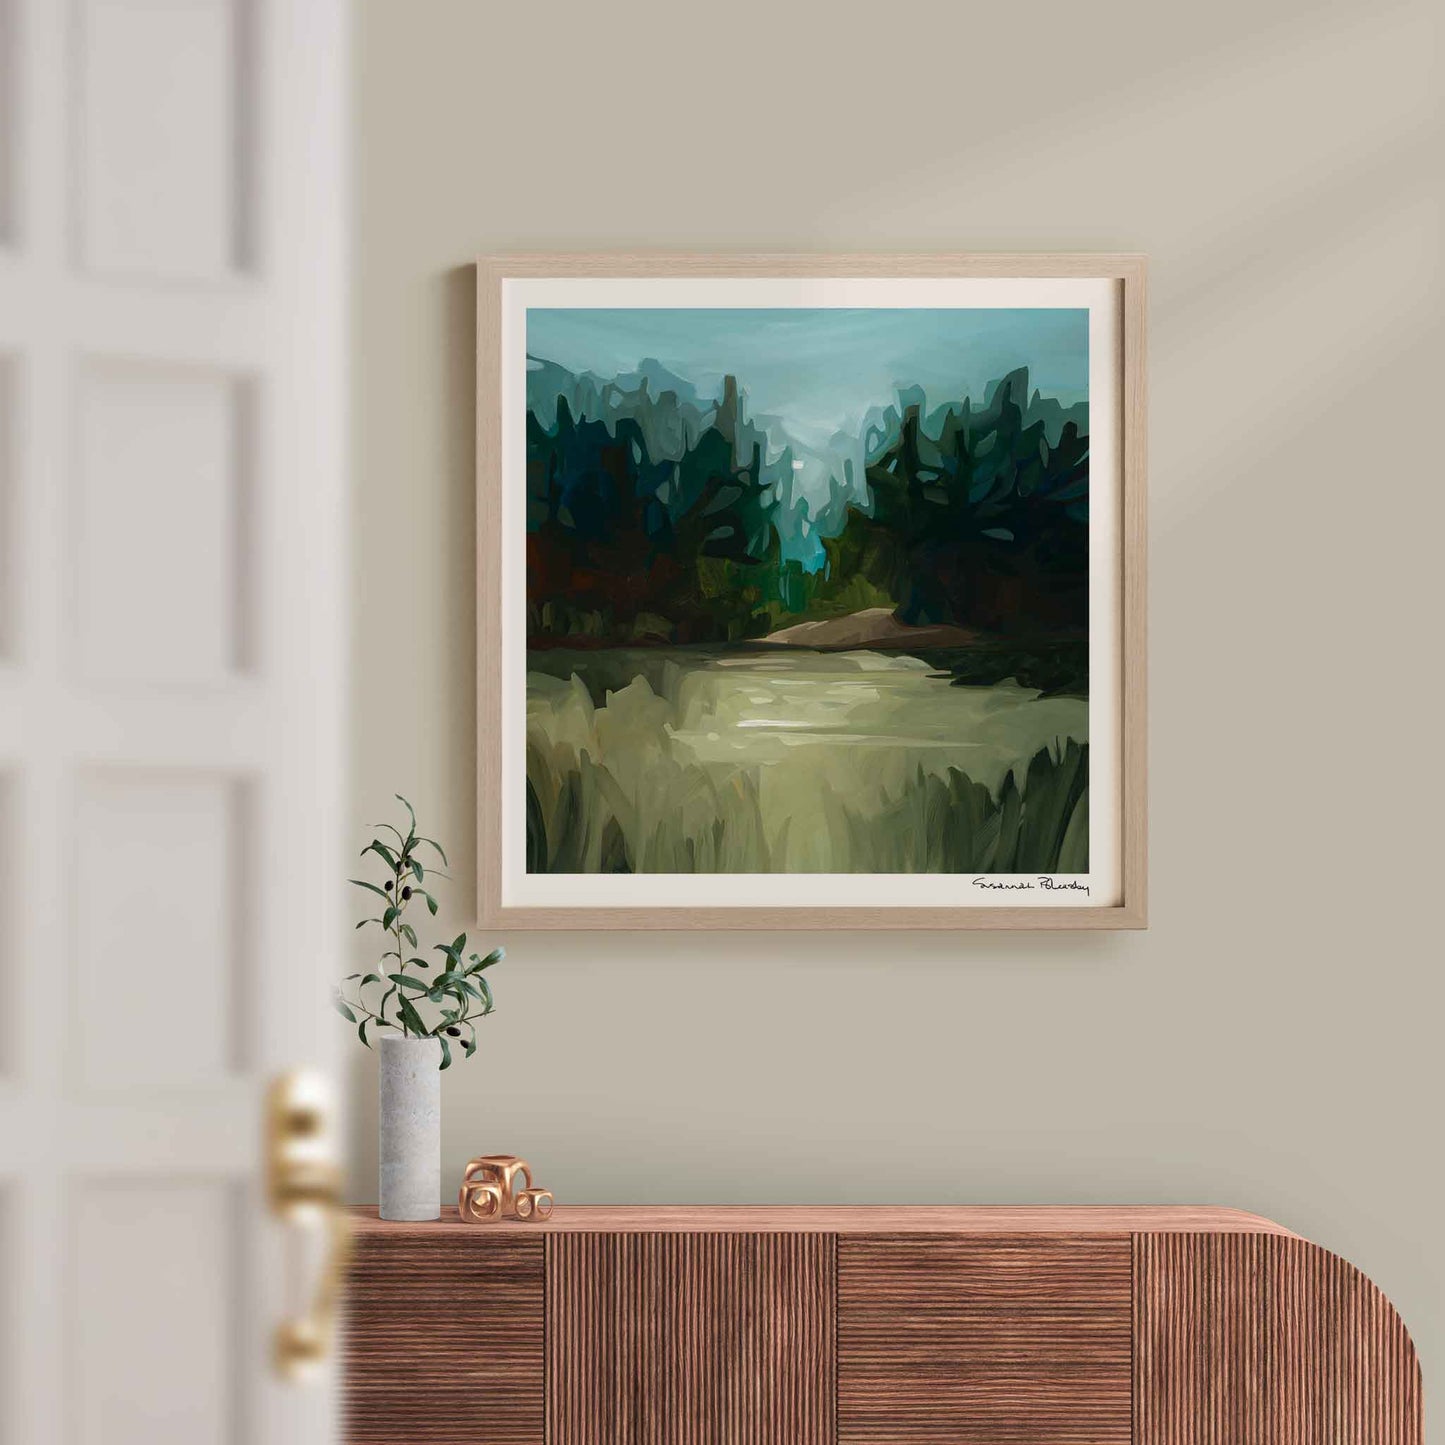 â€˜Pinecrestâ€™ is an abstract landscape art print of a forest painting with the mystery and magic of moonlight on the dark trees.